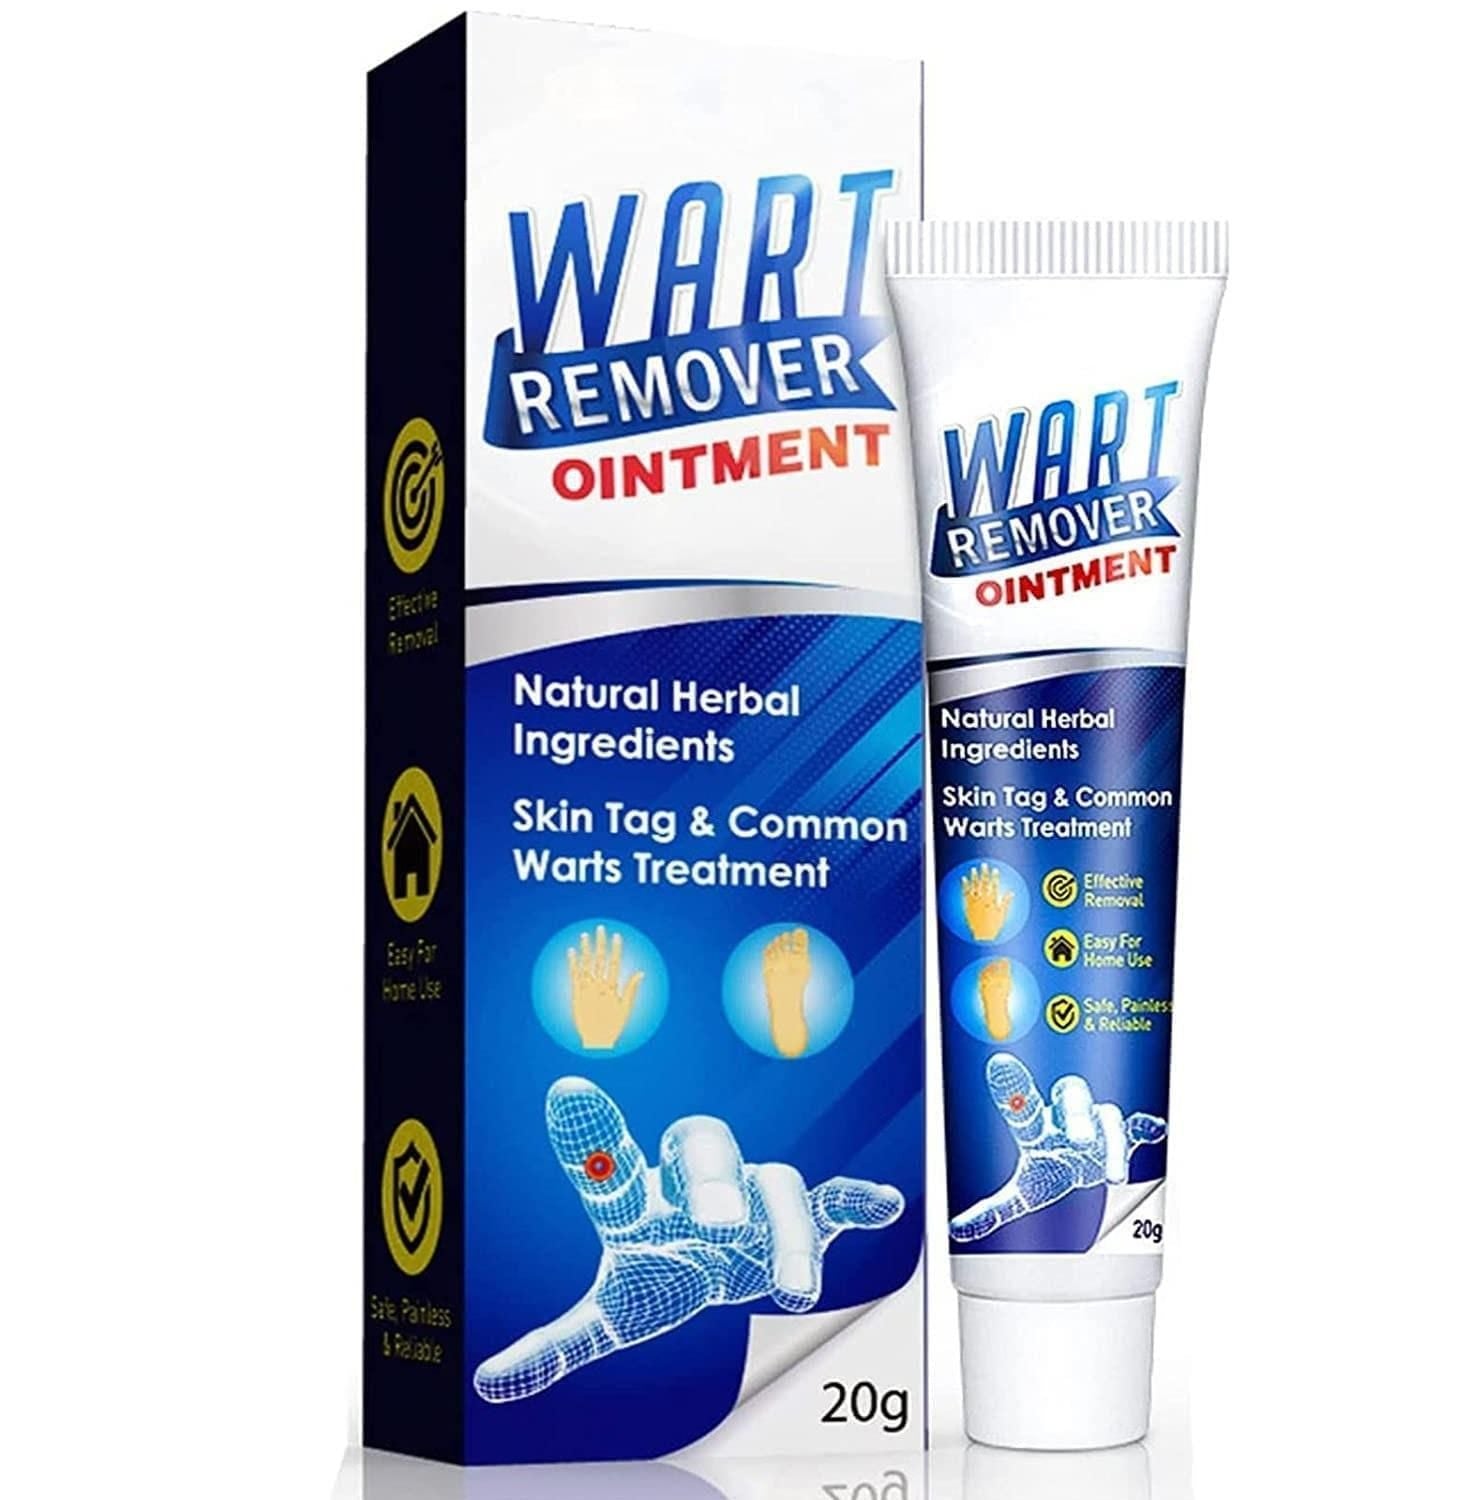 WART REMOVER OINTMENT CREAM - PACK OF 2